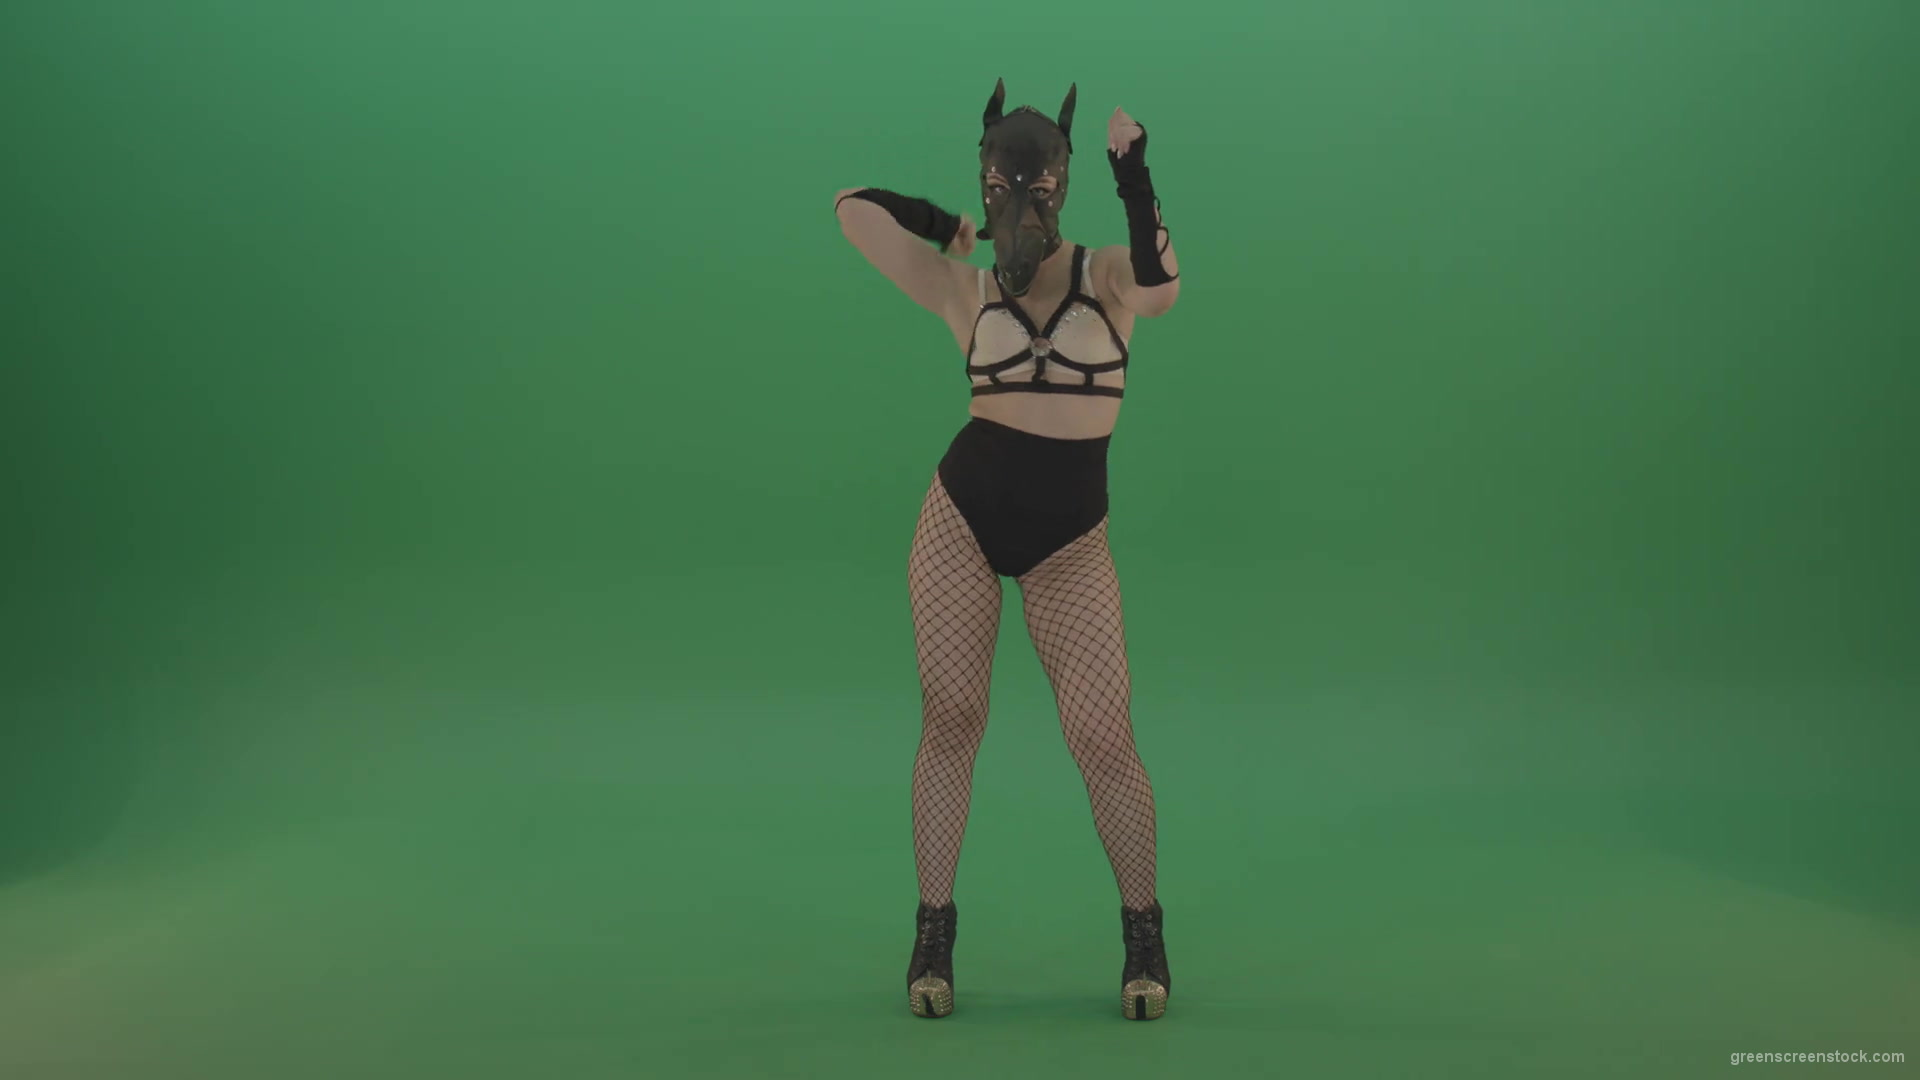 Girl-in-wolf-fetish-mask-sit-down-and-stand-up-making-hand-beat-on-green-screen-1920_009 Green Screen Stock